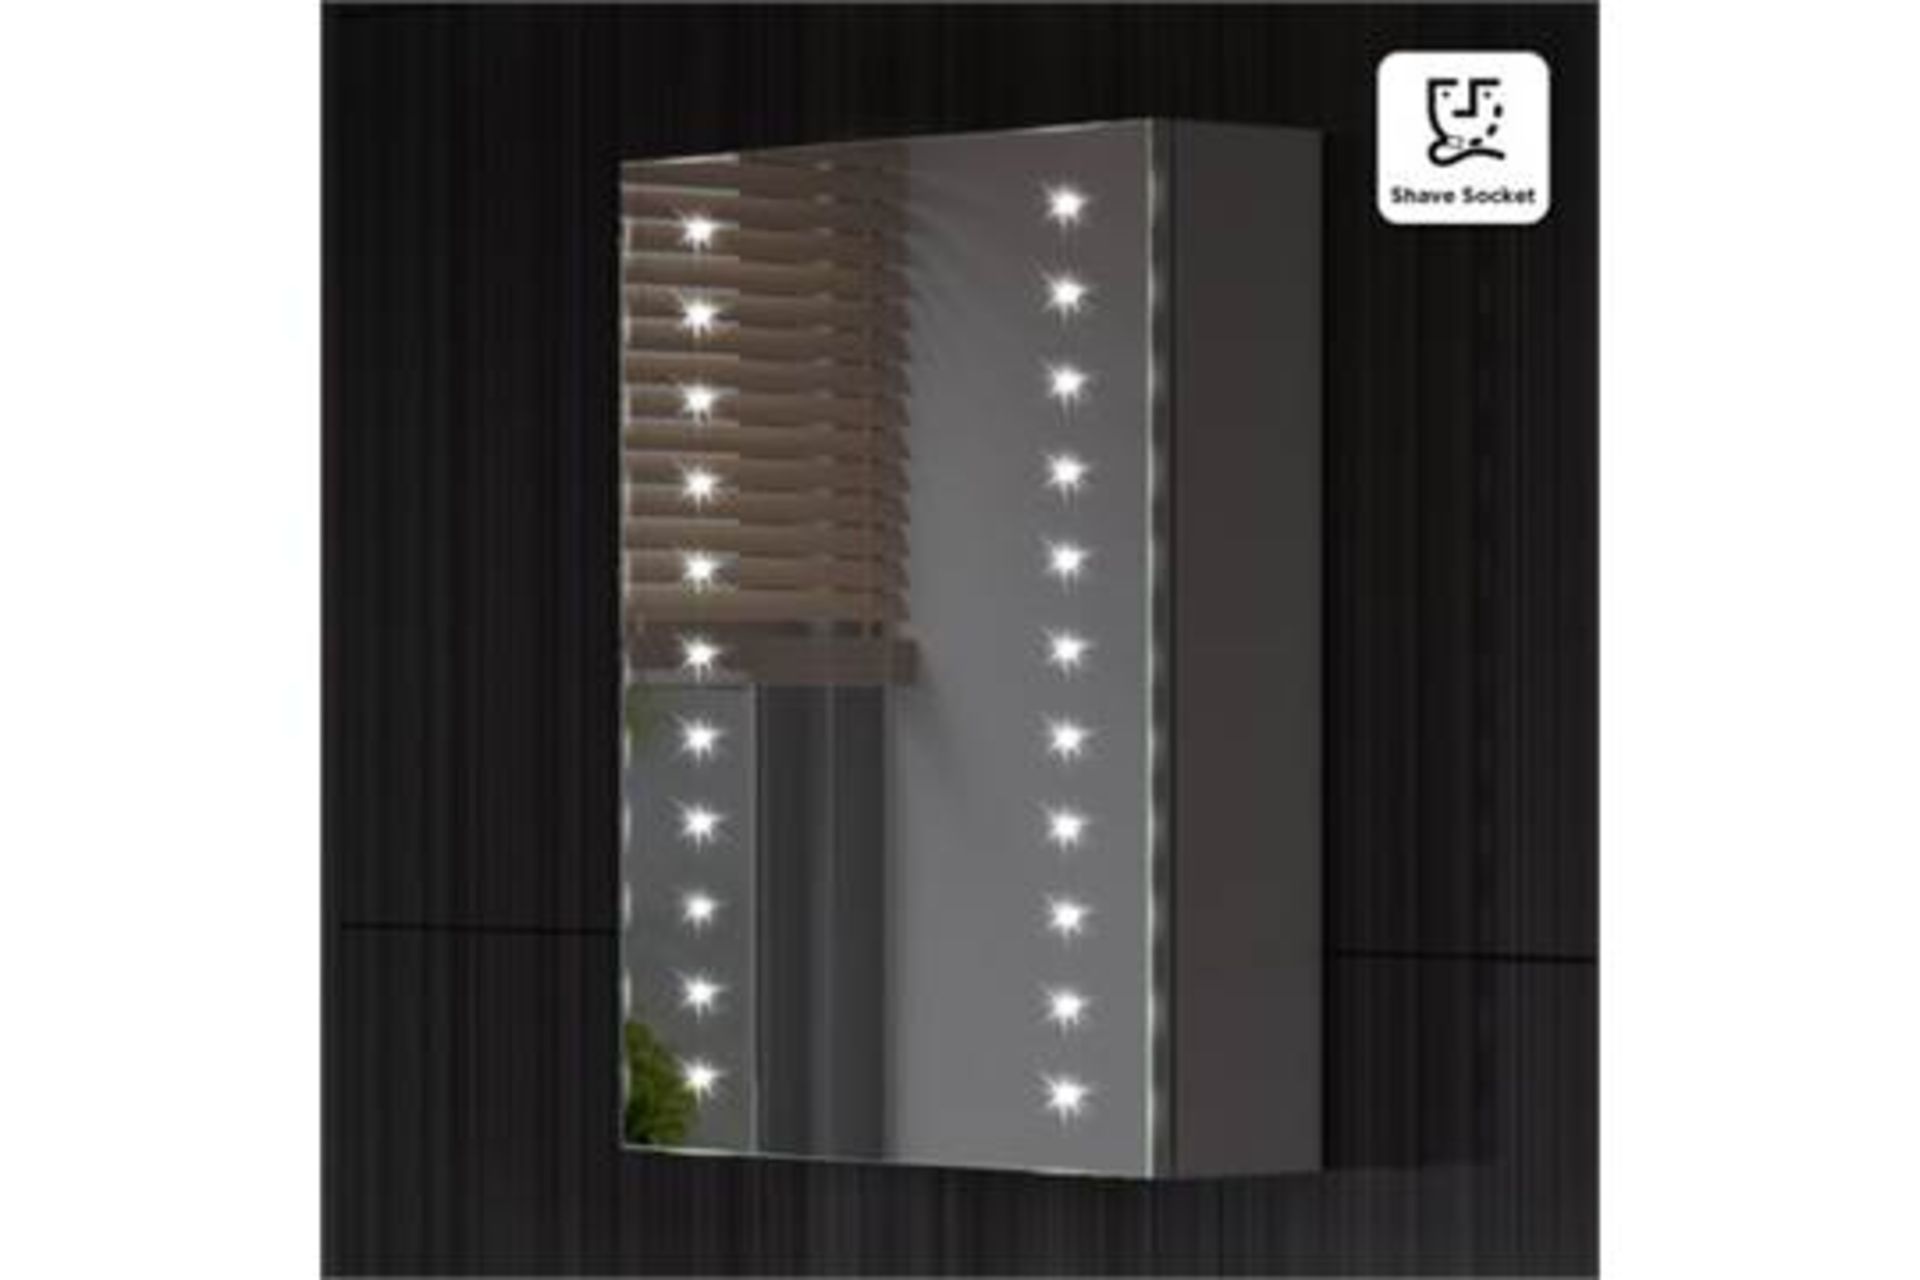 N14 - 450x600mm Galactic Illuminated LED Mirror Cabinet & Shaver Socket. RRP £299.99. The 450x600